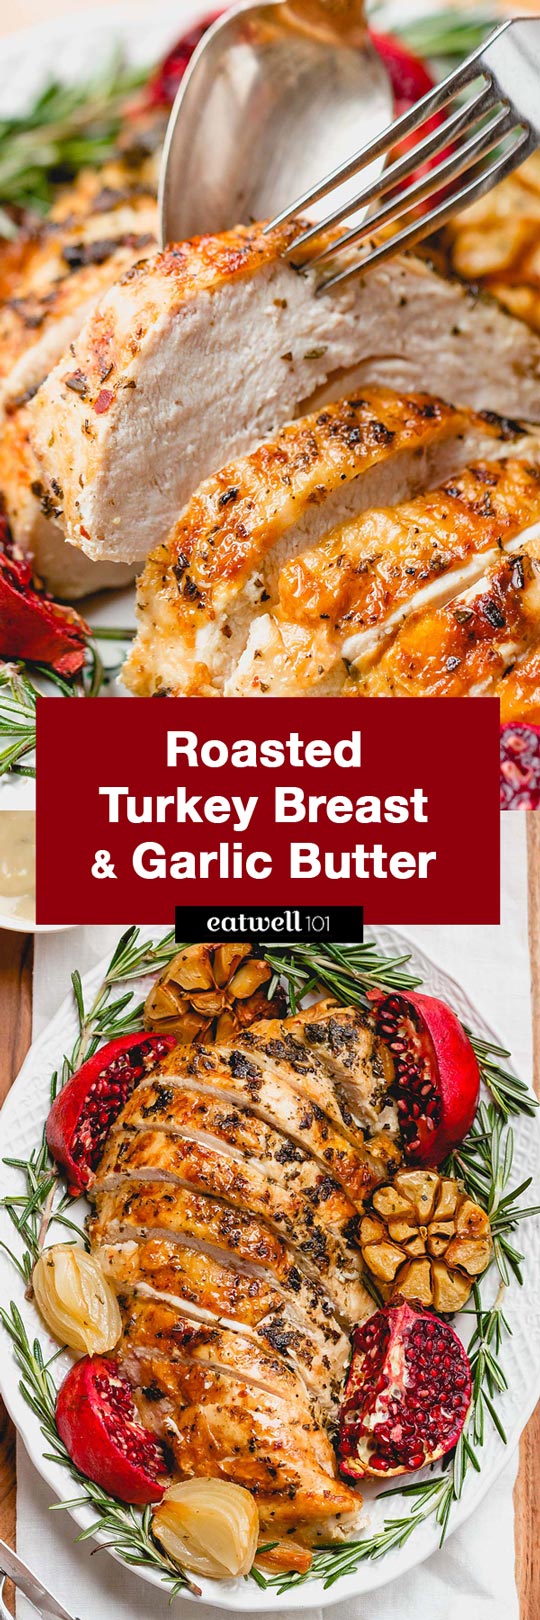 Roasted Turkey Breast with Garlic Herb Butter - An epic Thanksgiving holiday meal loaded with flavor and a super juicy meat. 